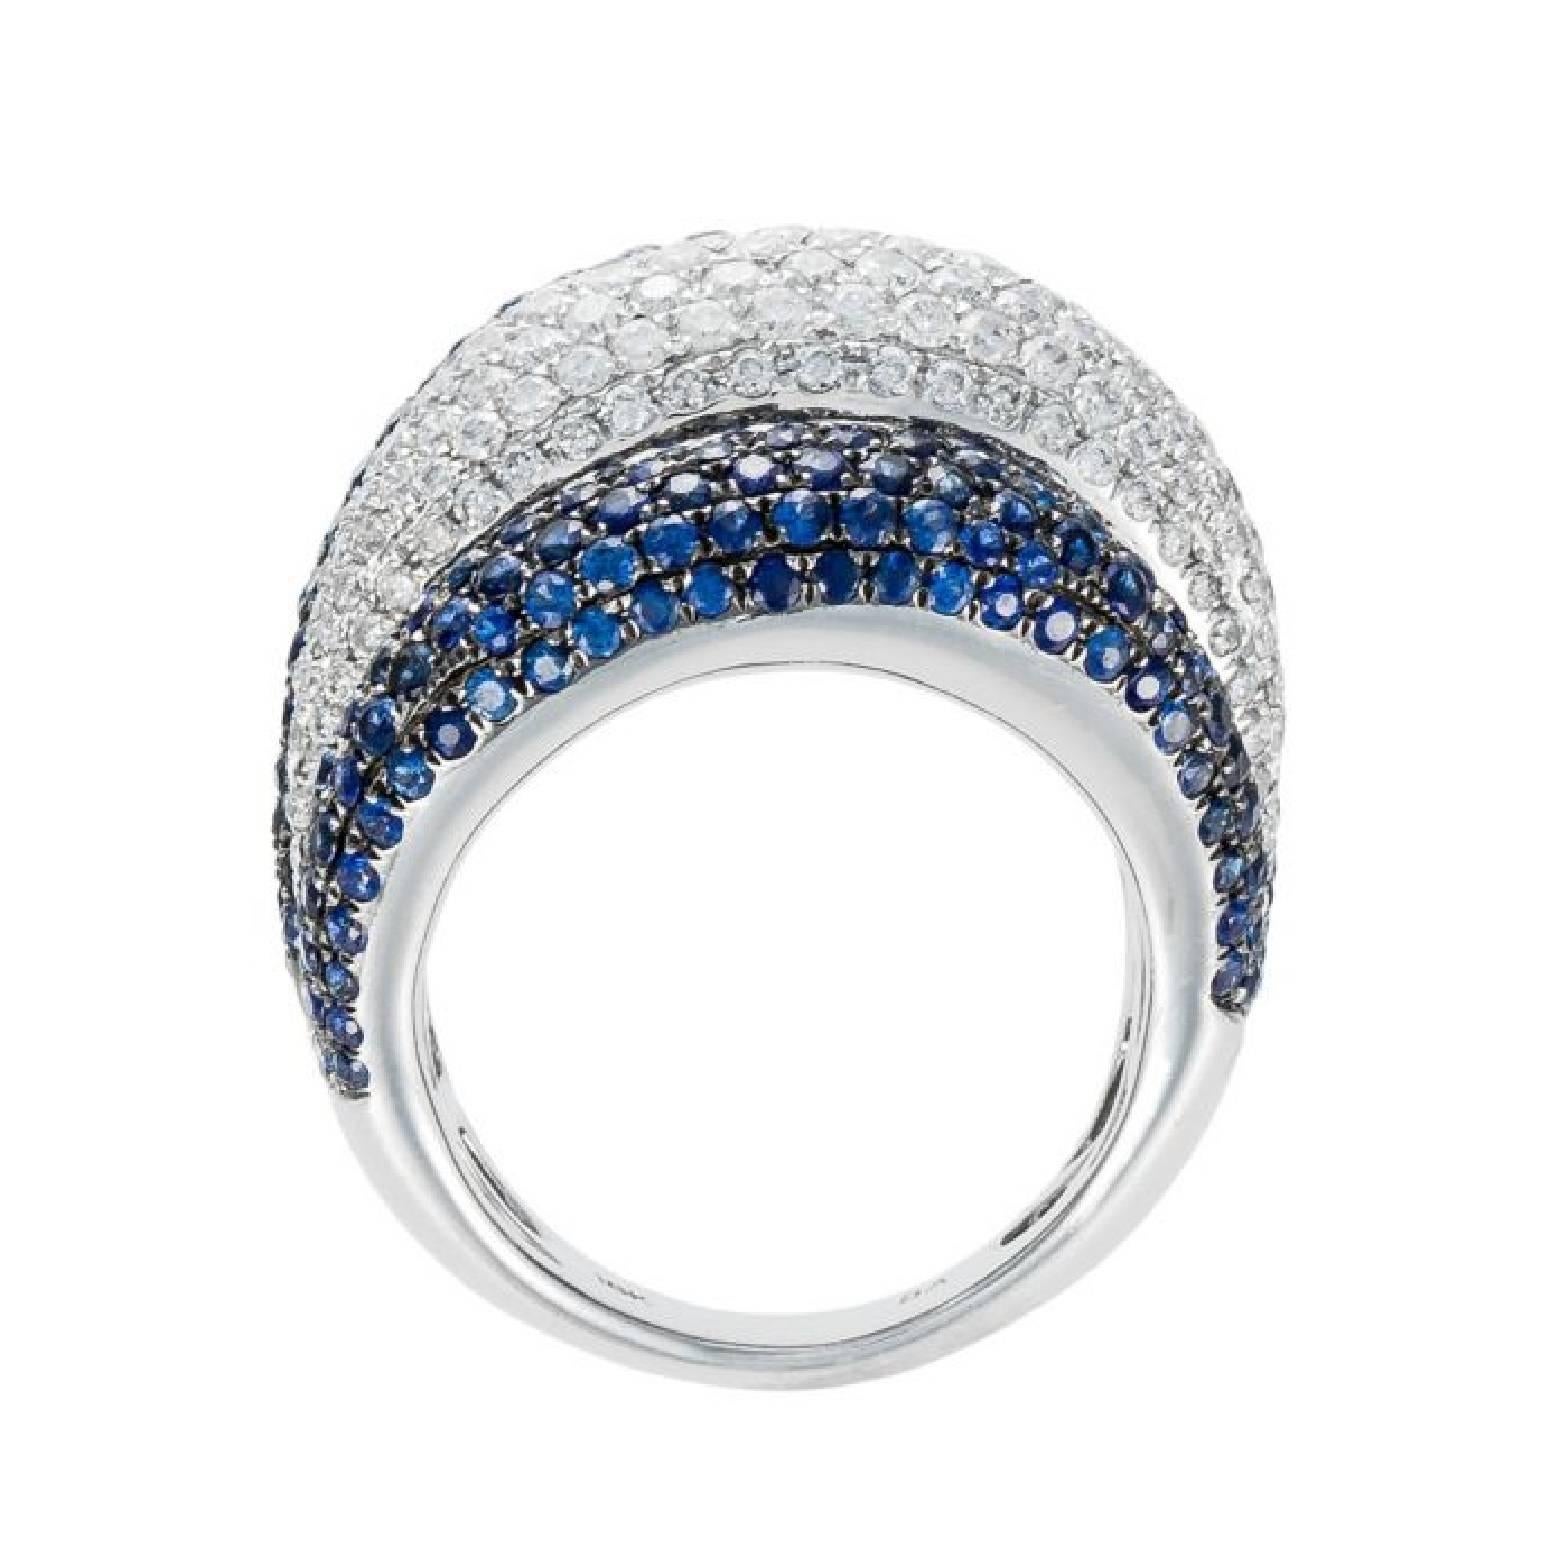 18K White Gold Sapphire and Diamond Dome Ring, features 5.00 carats of blue sapphires with 2.50 carats of diamonds. The diamond color and clarity is G-H SI

